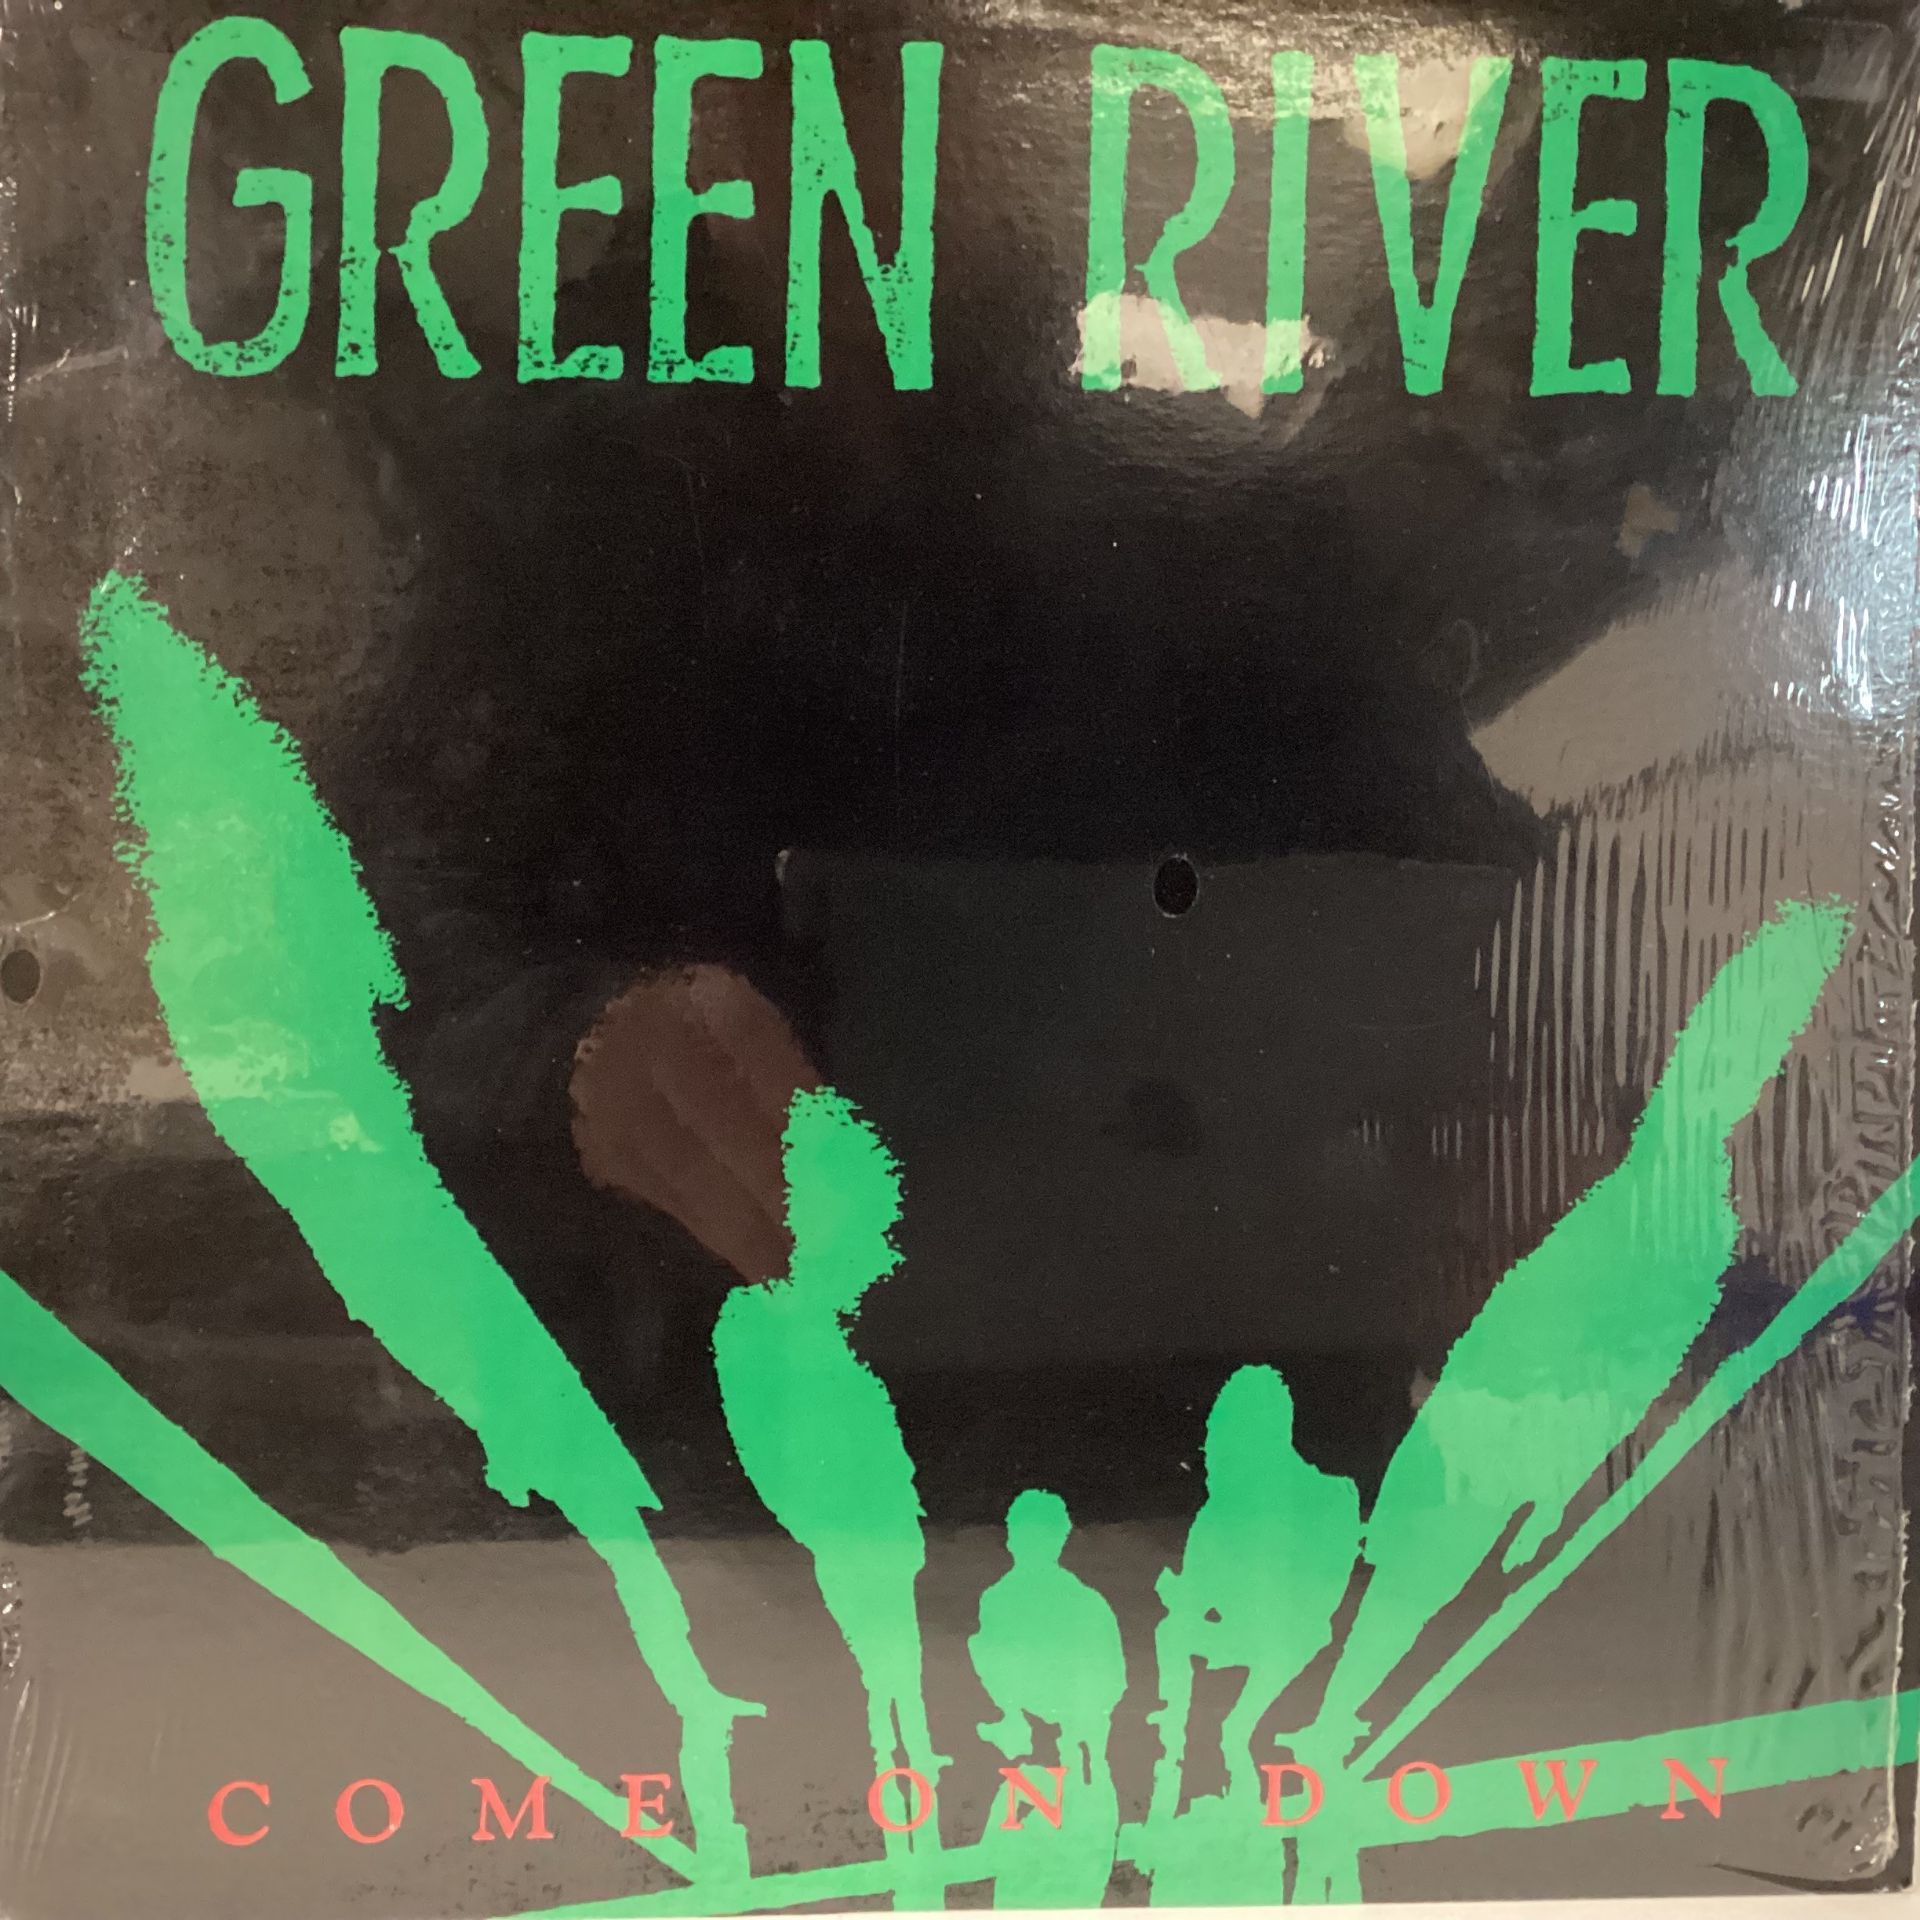 GREEN RIVER 'COME ON DOWN' VINYL LP. Ex condition vinyl here on Glitter House Records GR 0031